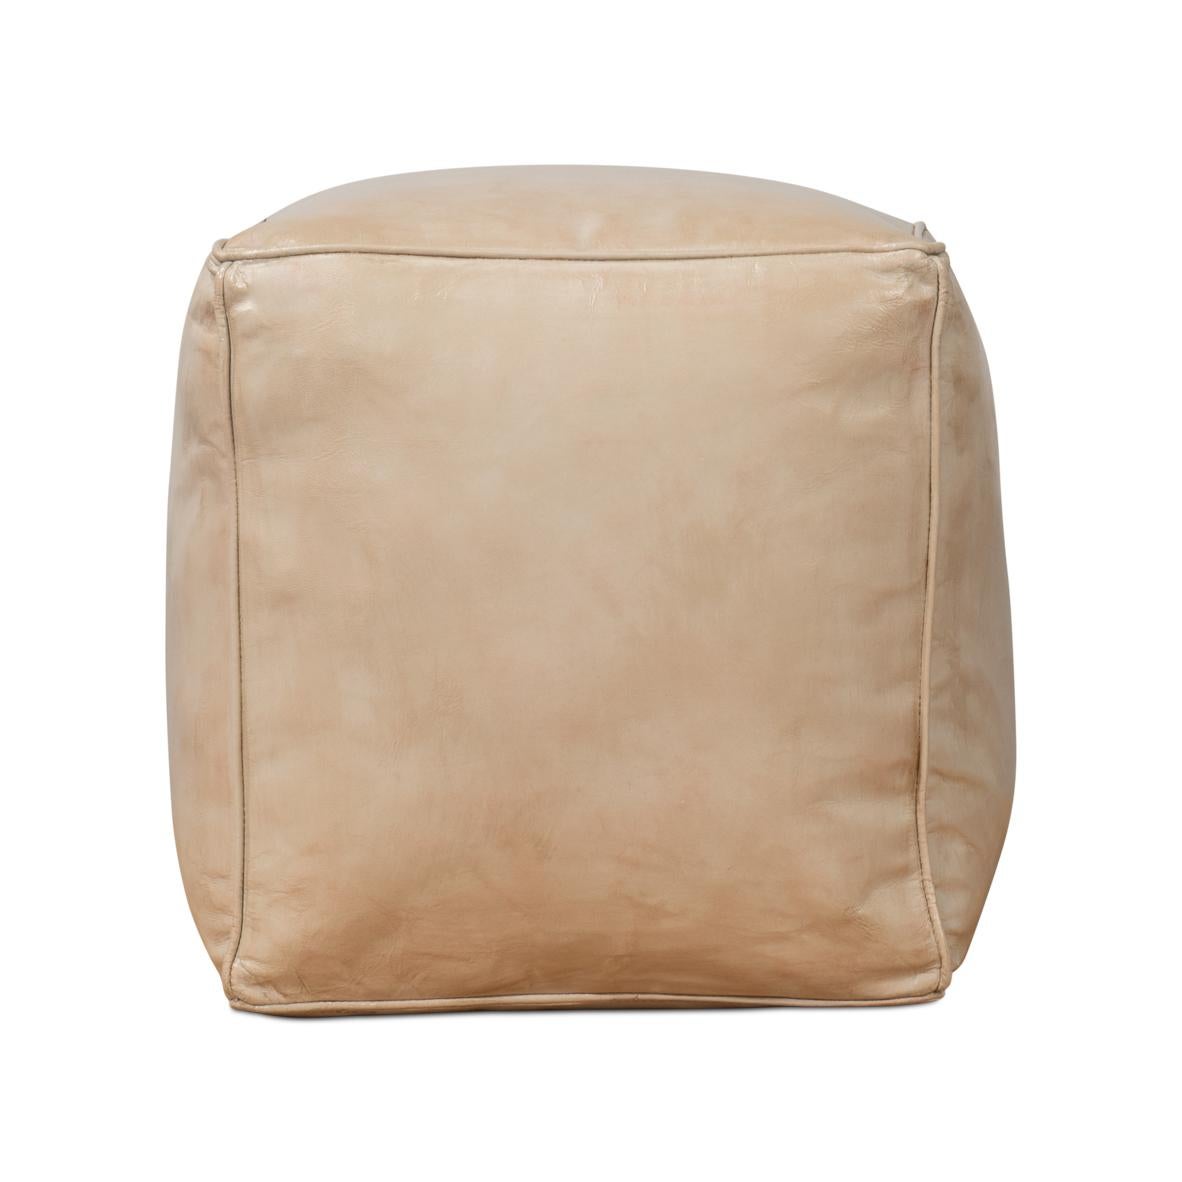 Contemporary Beige Leather Cube For Sale